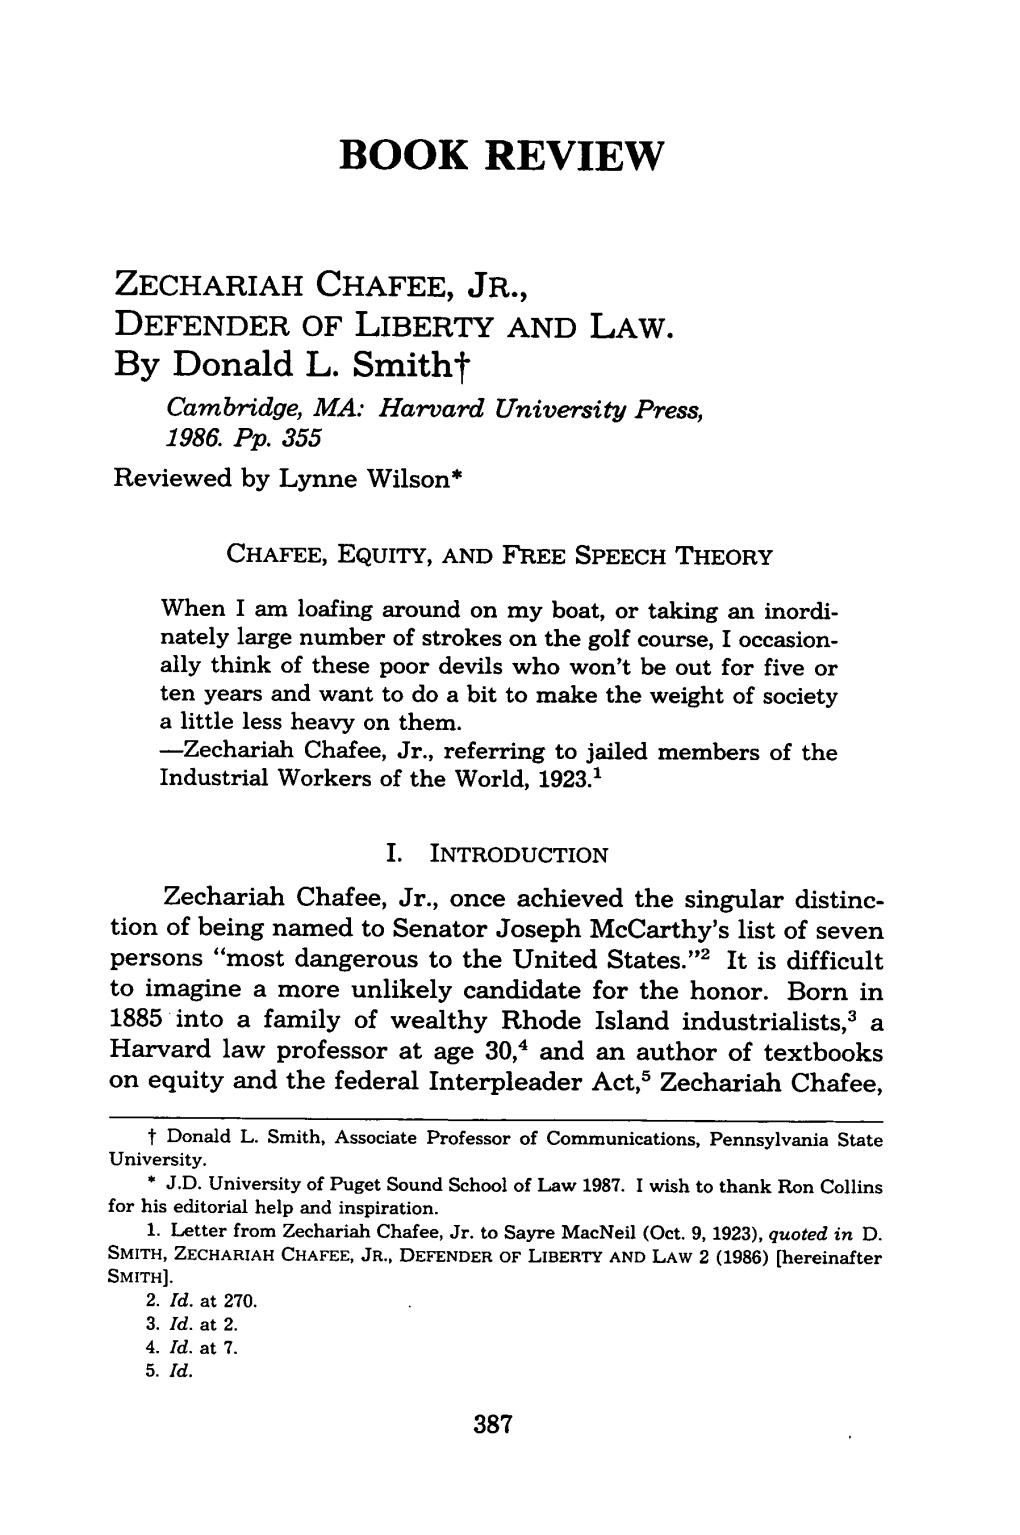 Zechariah Chafee, Jr., Defender of Liberty and Law by Donald L. Smith